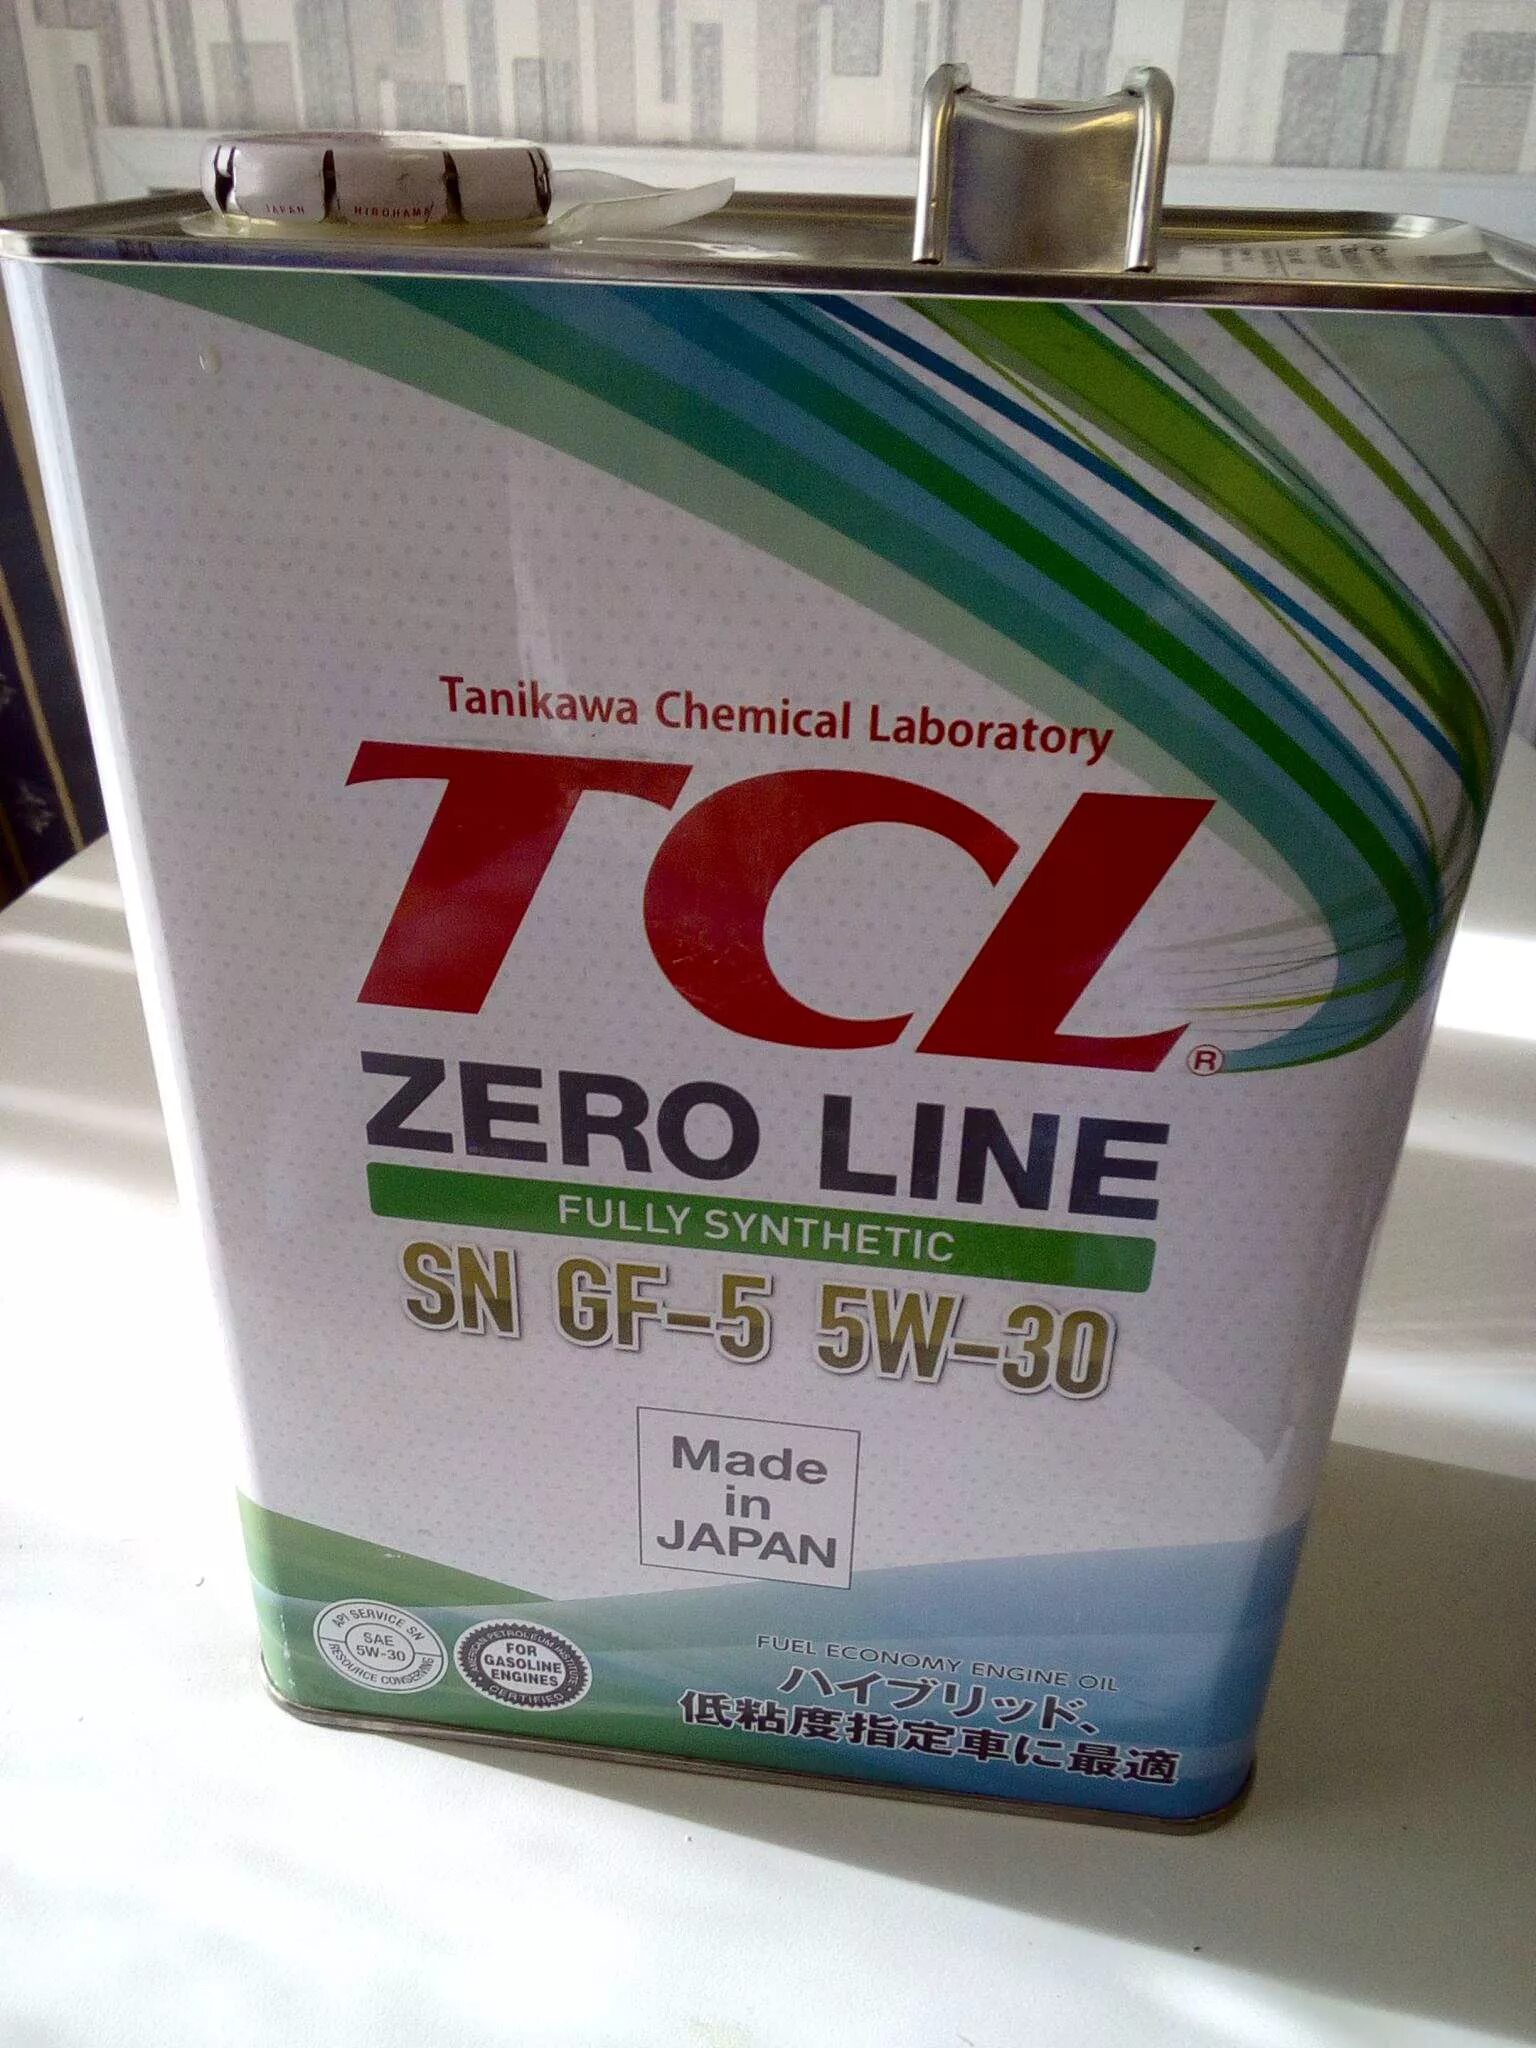 Масло tcl 5w 30. TCL Zero line 5w30. Масло TCL Zero line 5w-30. TCL SN gf-5 5w-30. TCL 5w-30 gf-5.